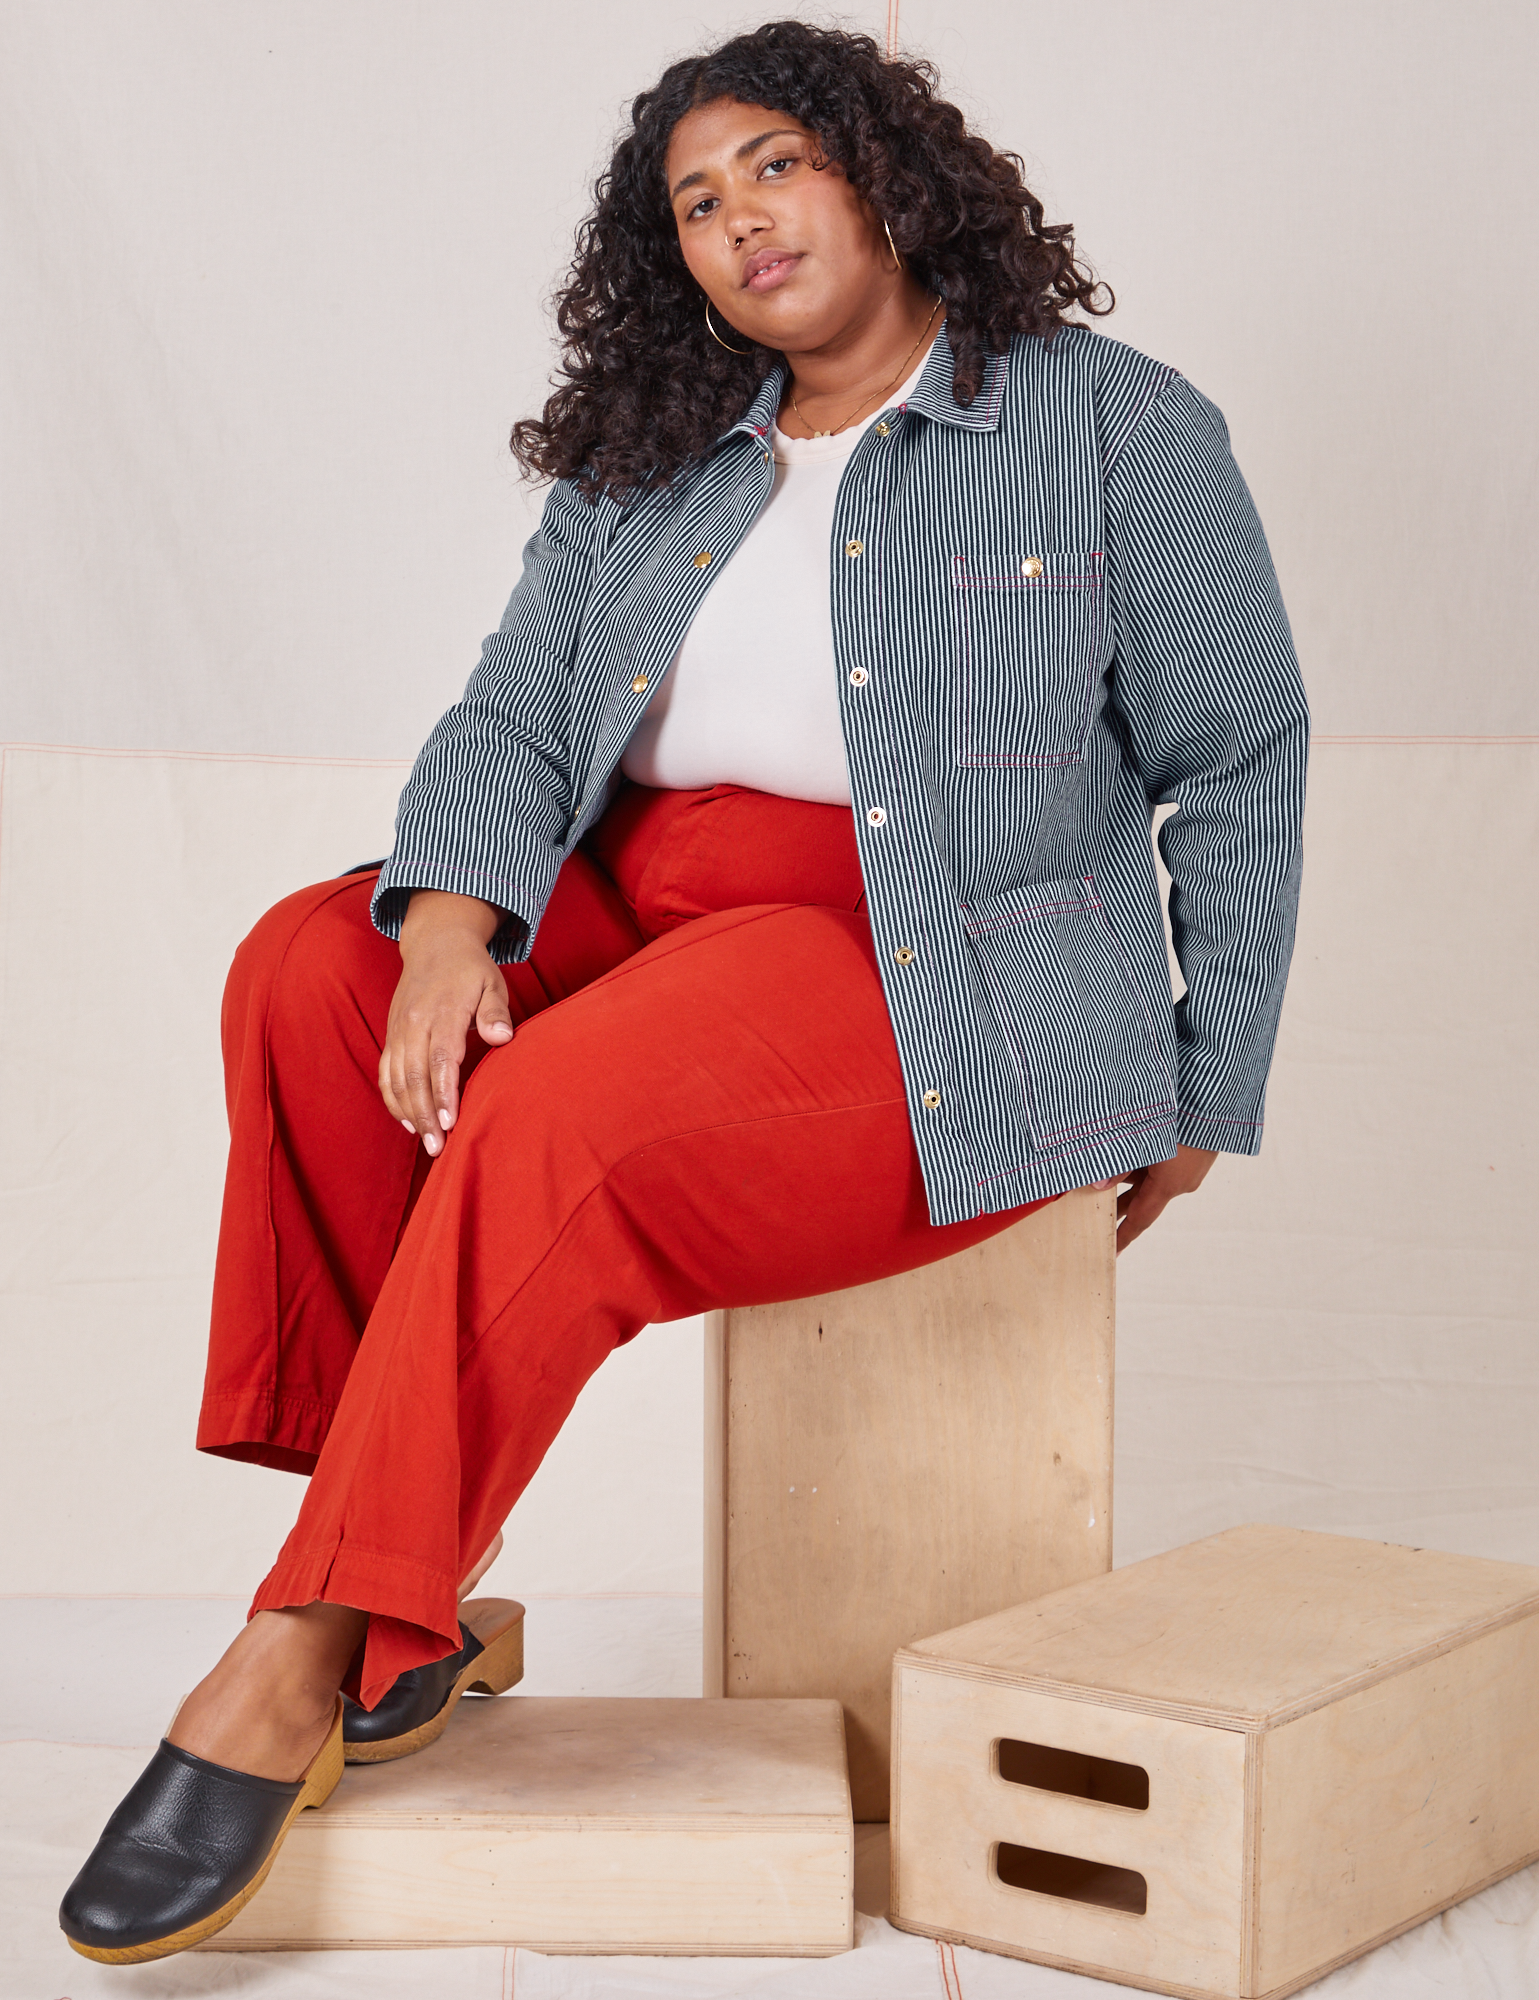 Morgan is 5'5" and wearing 1XL Railroad Stripe Denim Work Jacket paired with paprika Western Pants